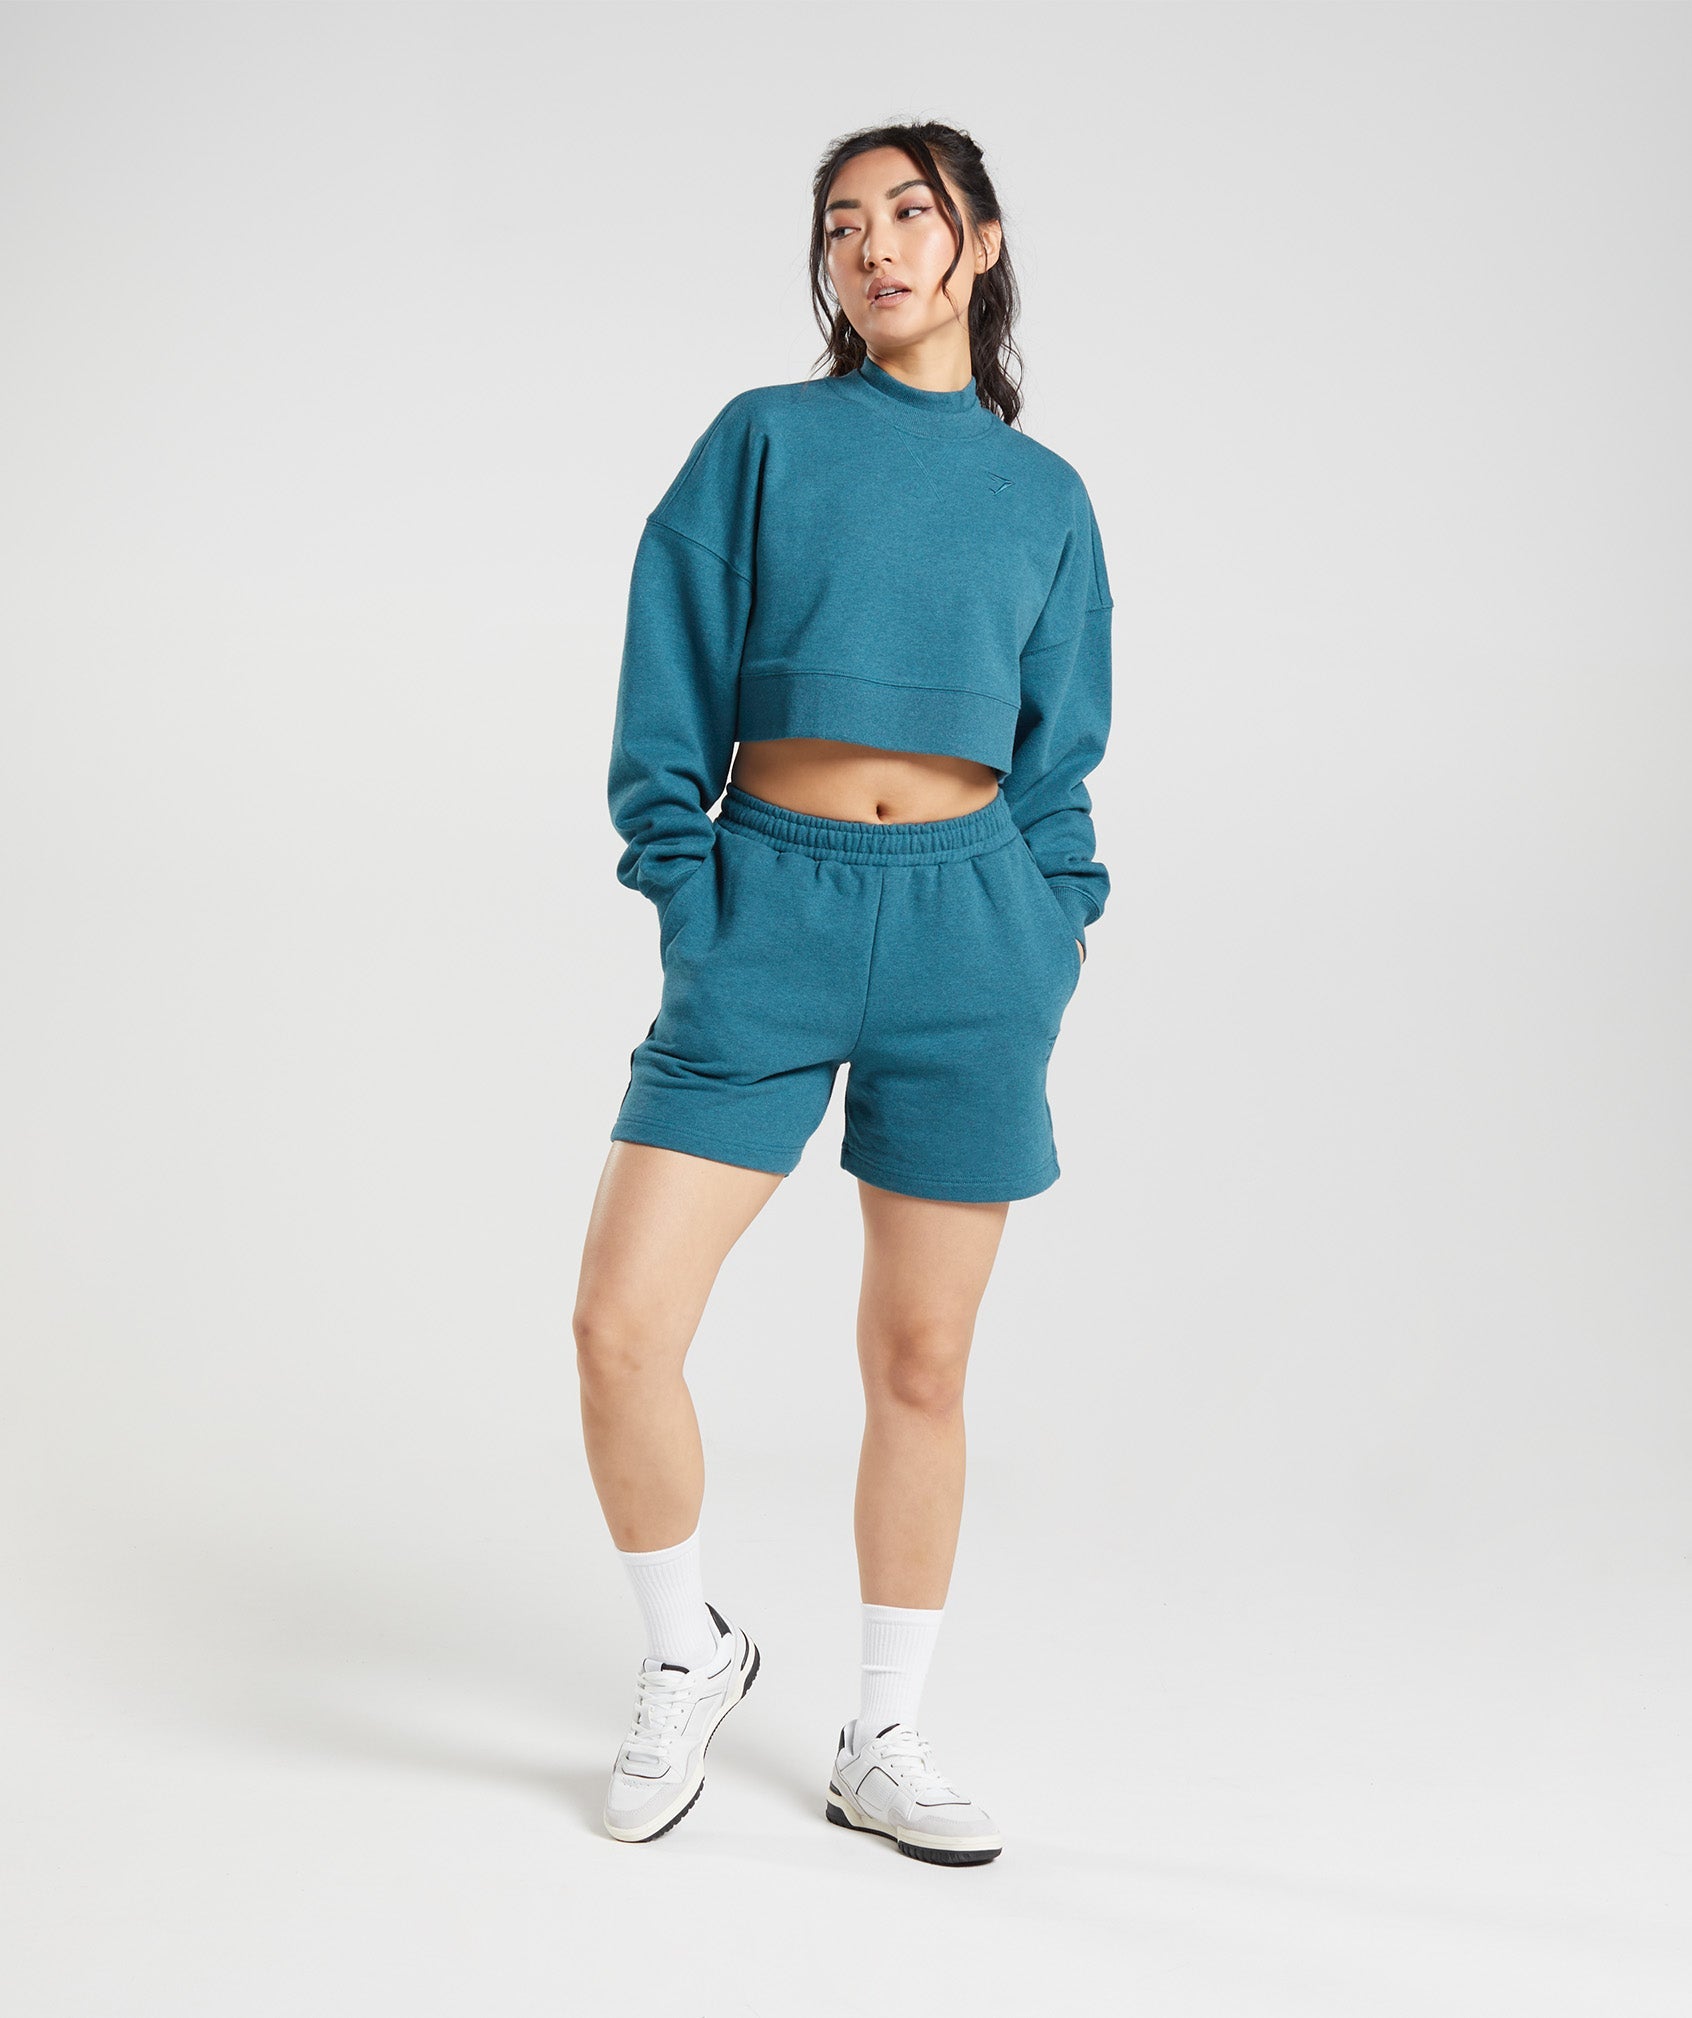 Rest Day Sweats Cropped Pullover in Steel Blue Marl - view 4